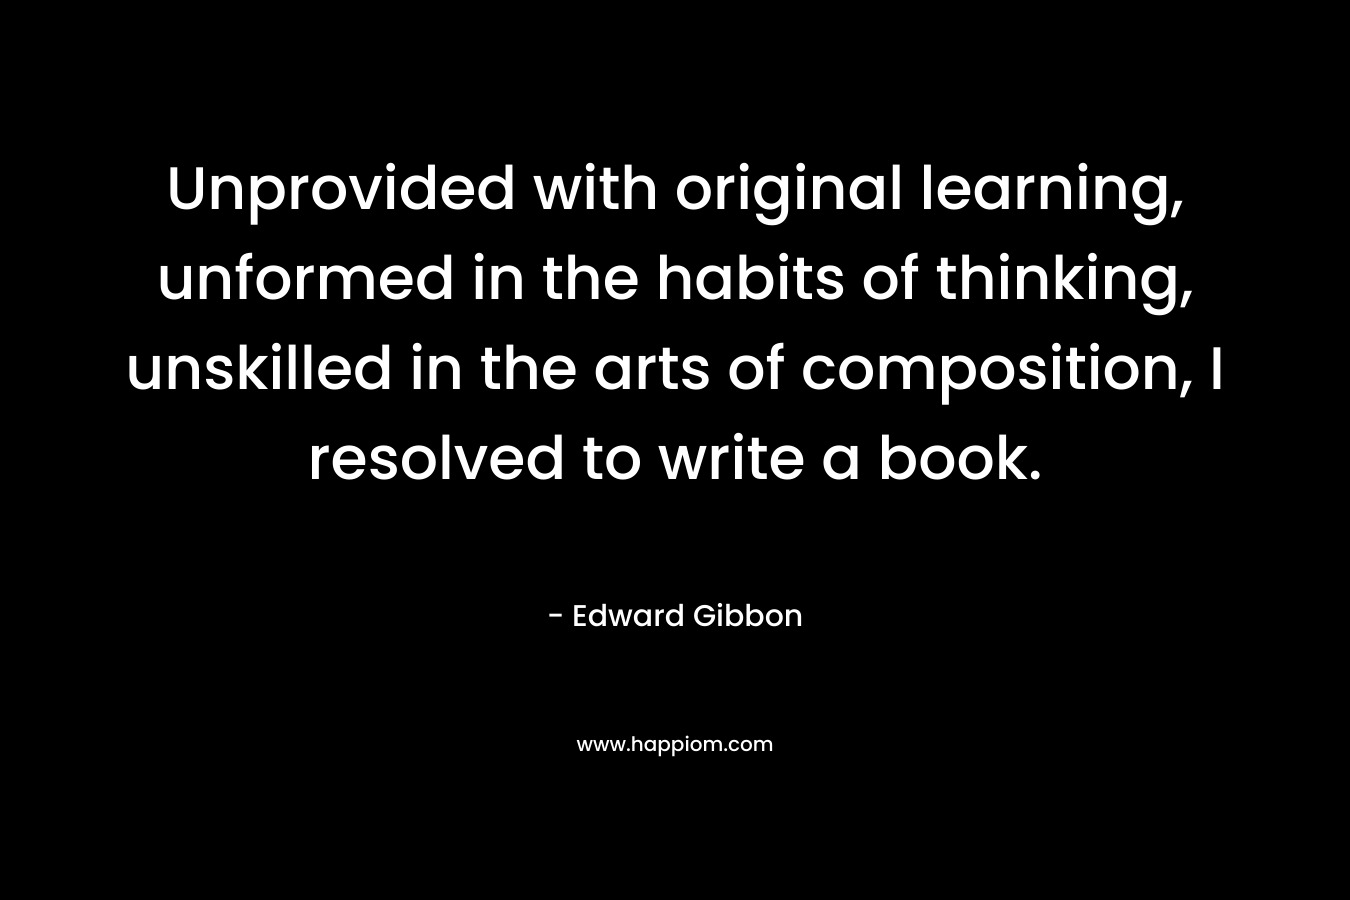 Unprovided with original learning, unformed in the habits of thinking, unskilled in the arts of composition, I resolved to write a book.  – Edward Gibbon